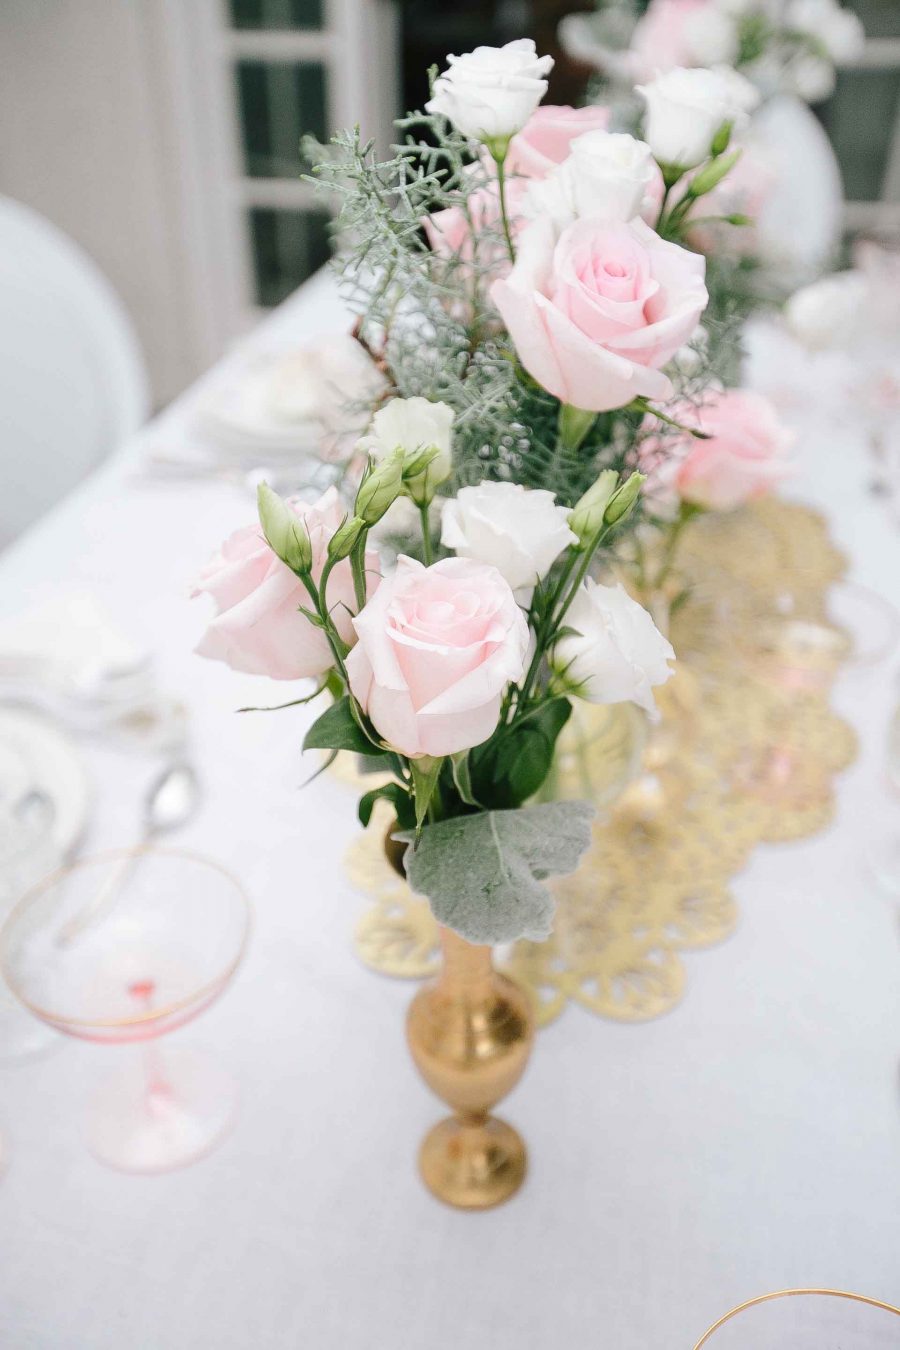 Host a Winter Bridal Shower with BHLDN by FashionableHostess.com